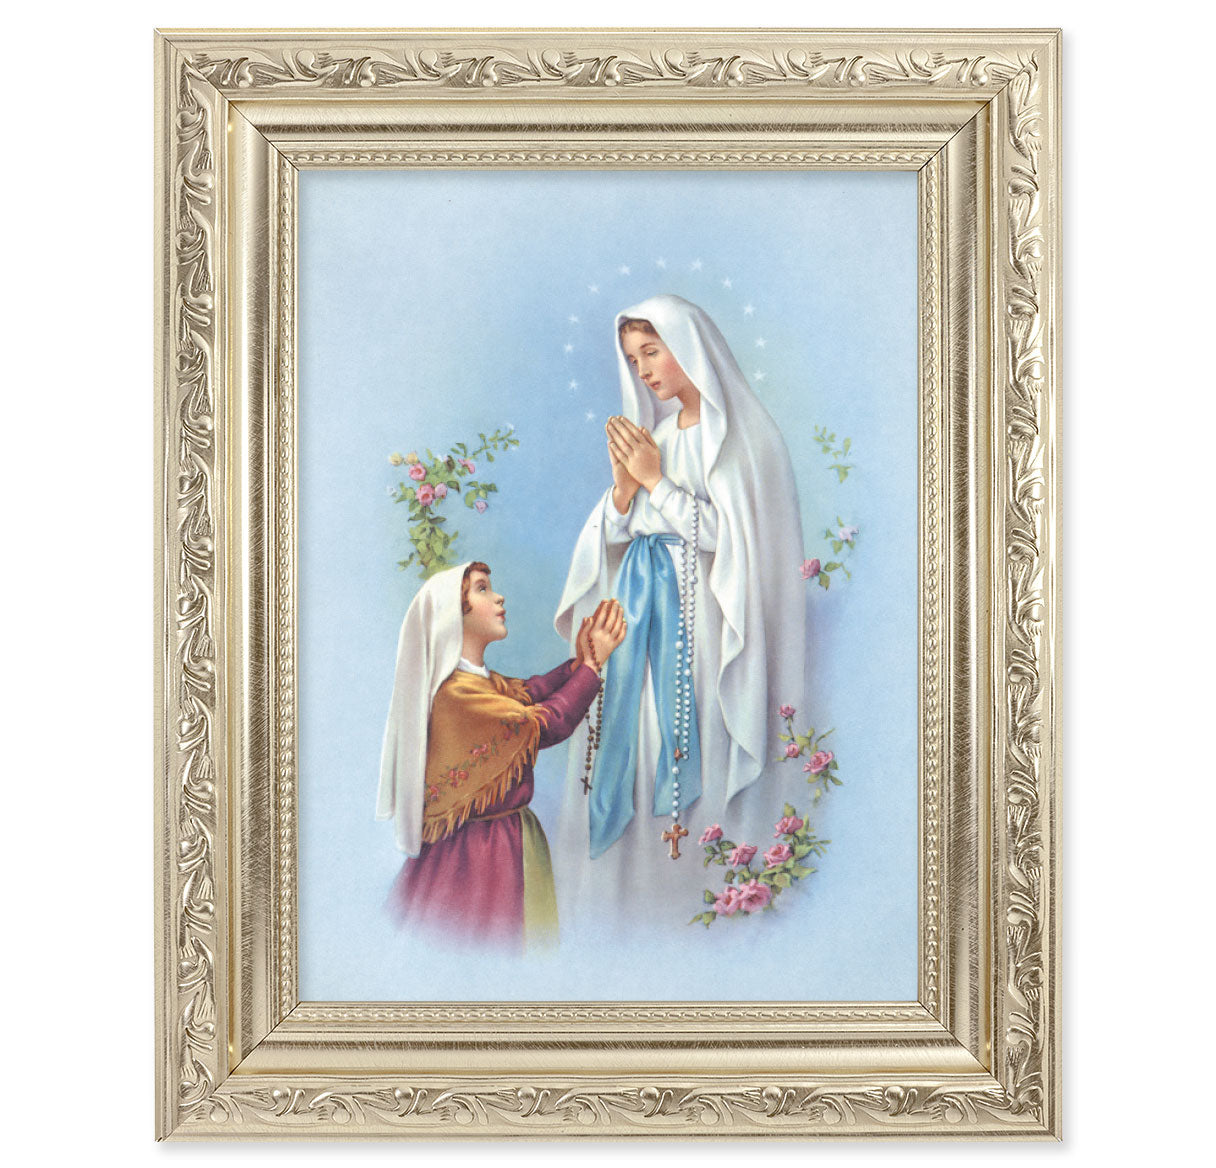 Our Lady of Lourdes Silver Framed Art